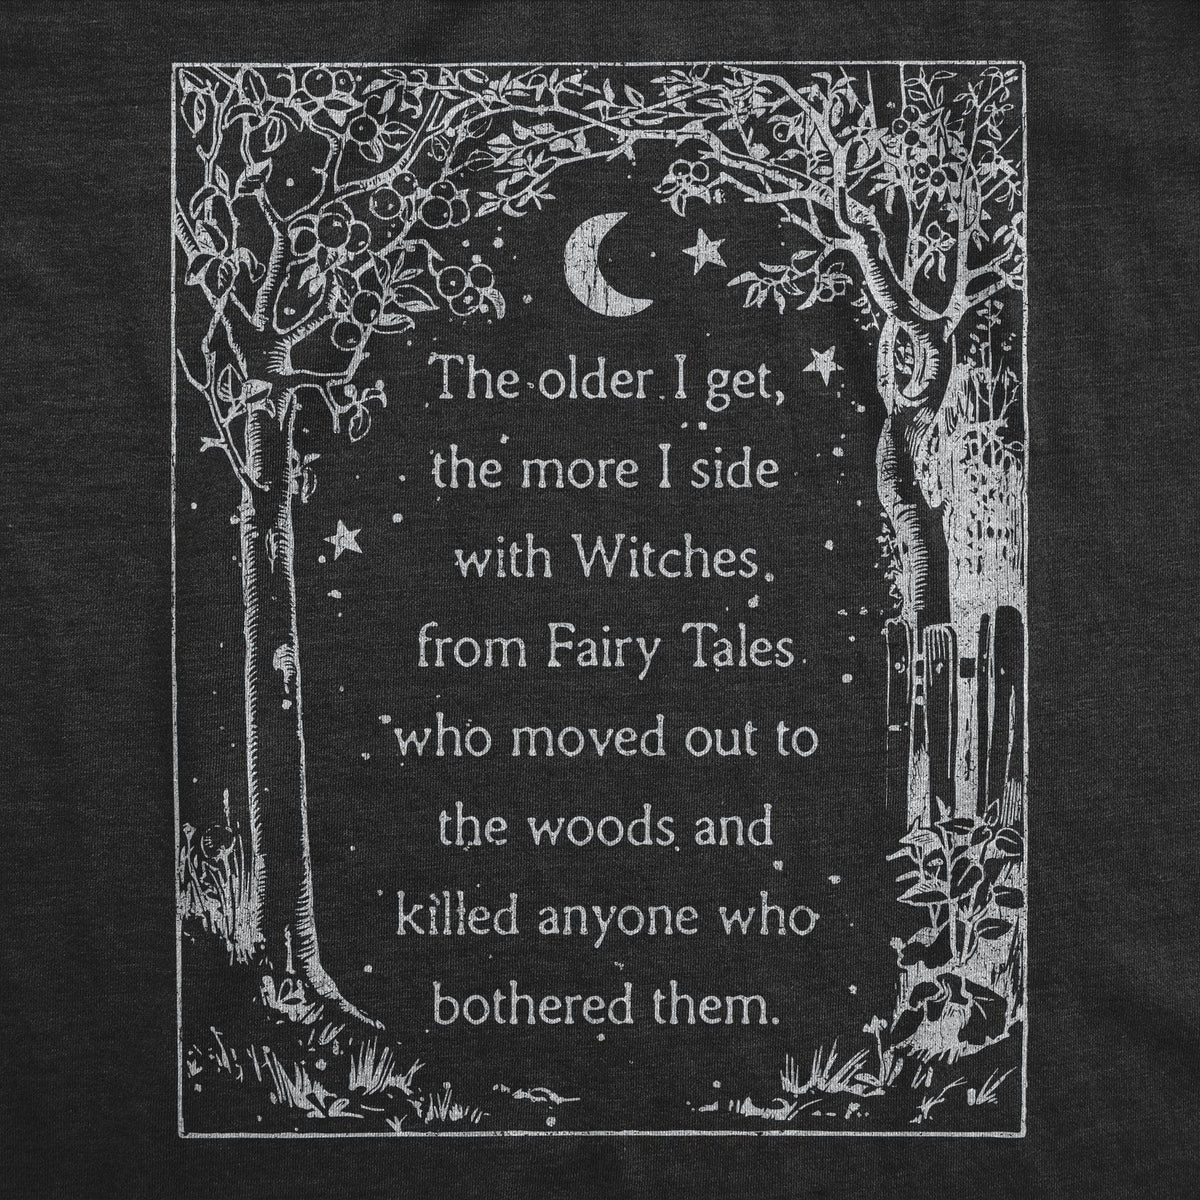 The Older I Get The More I Side With Witches Women&#39;s Tshirt  -  Crazy Dog T-Shirts